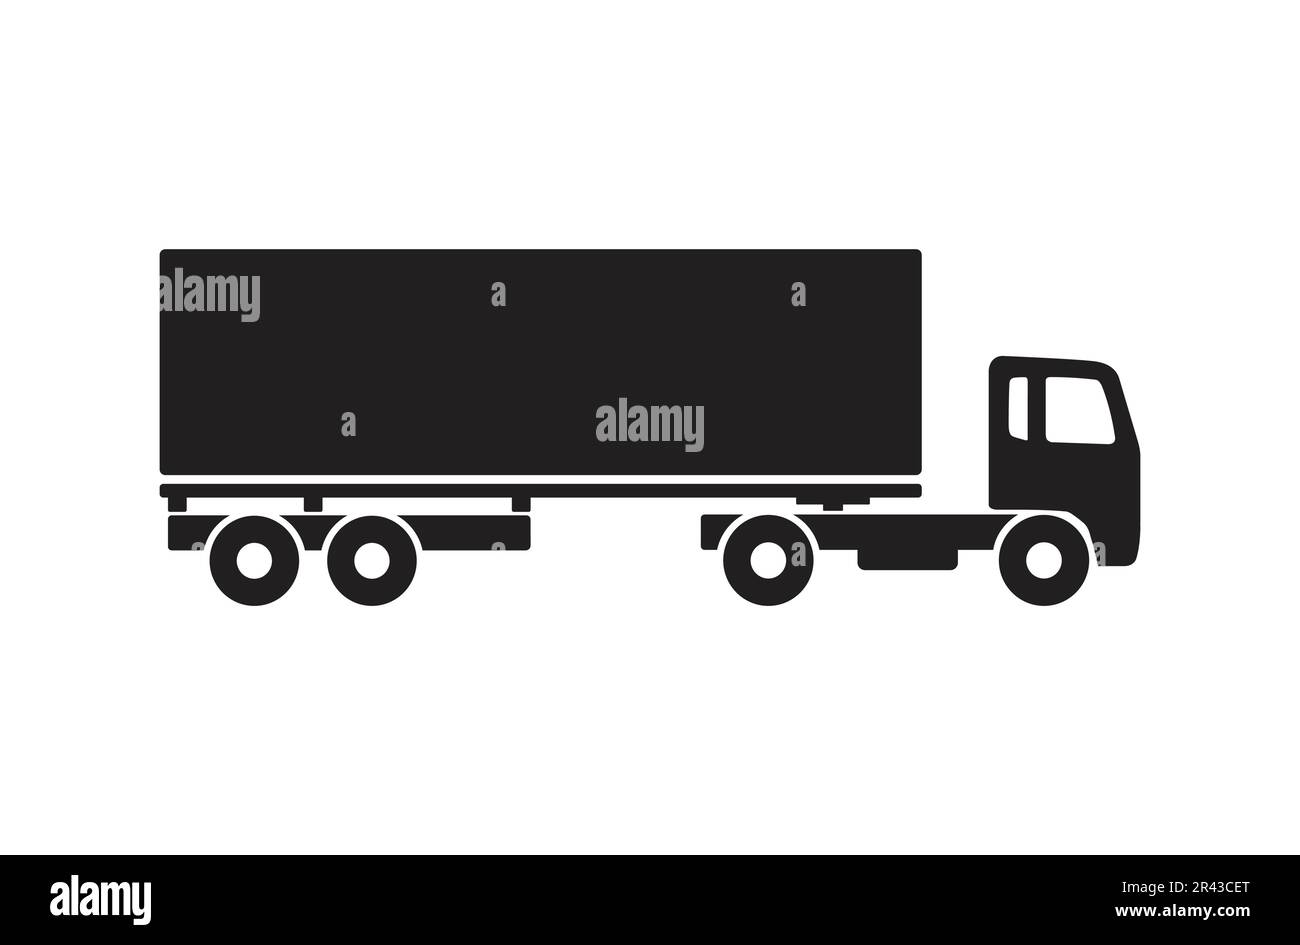 simple semi trailer flat nose container truck articulated black silhouette side view icon symbol vector isolated on white background Stock Vector